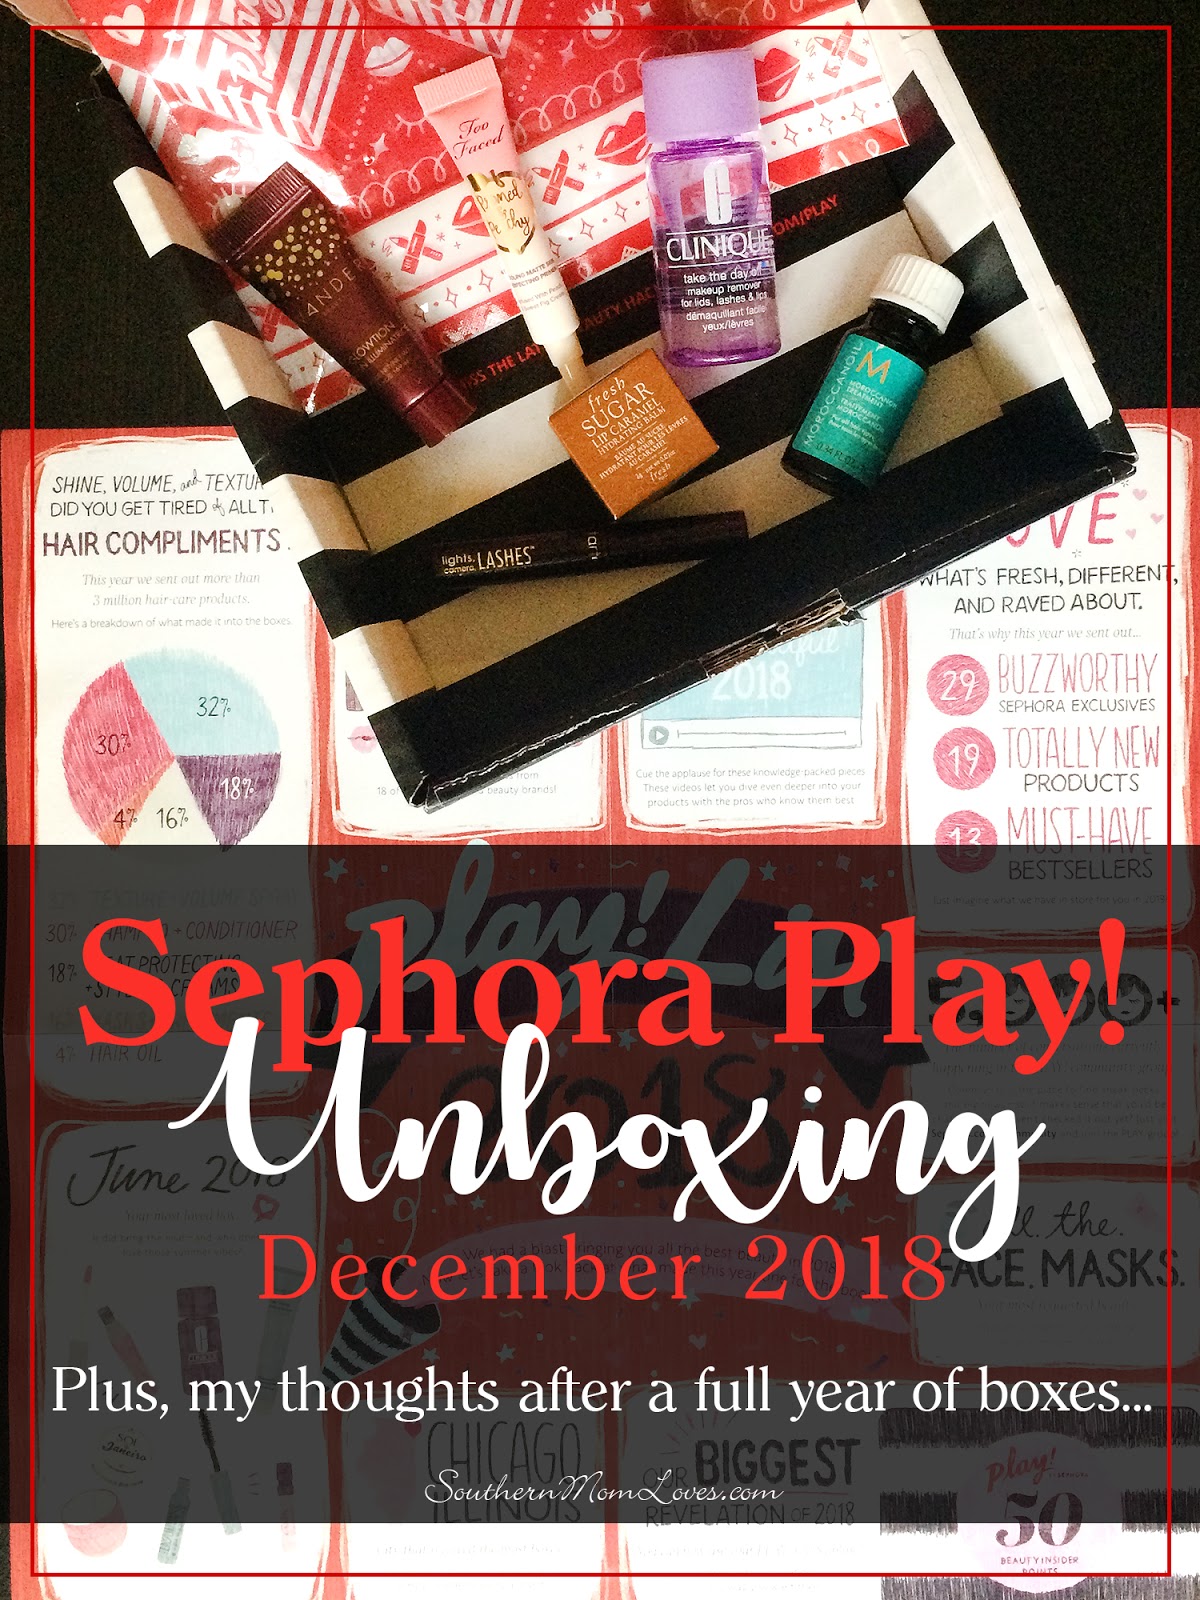 Play! by Sephora - The Iconic Edition Unboxing - CheersRachel